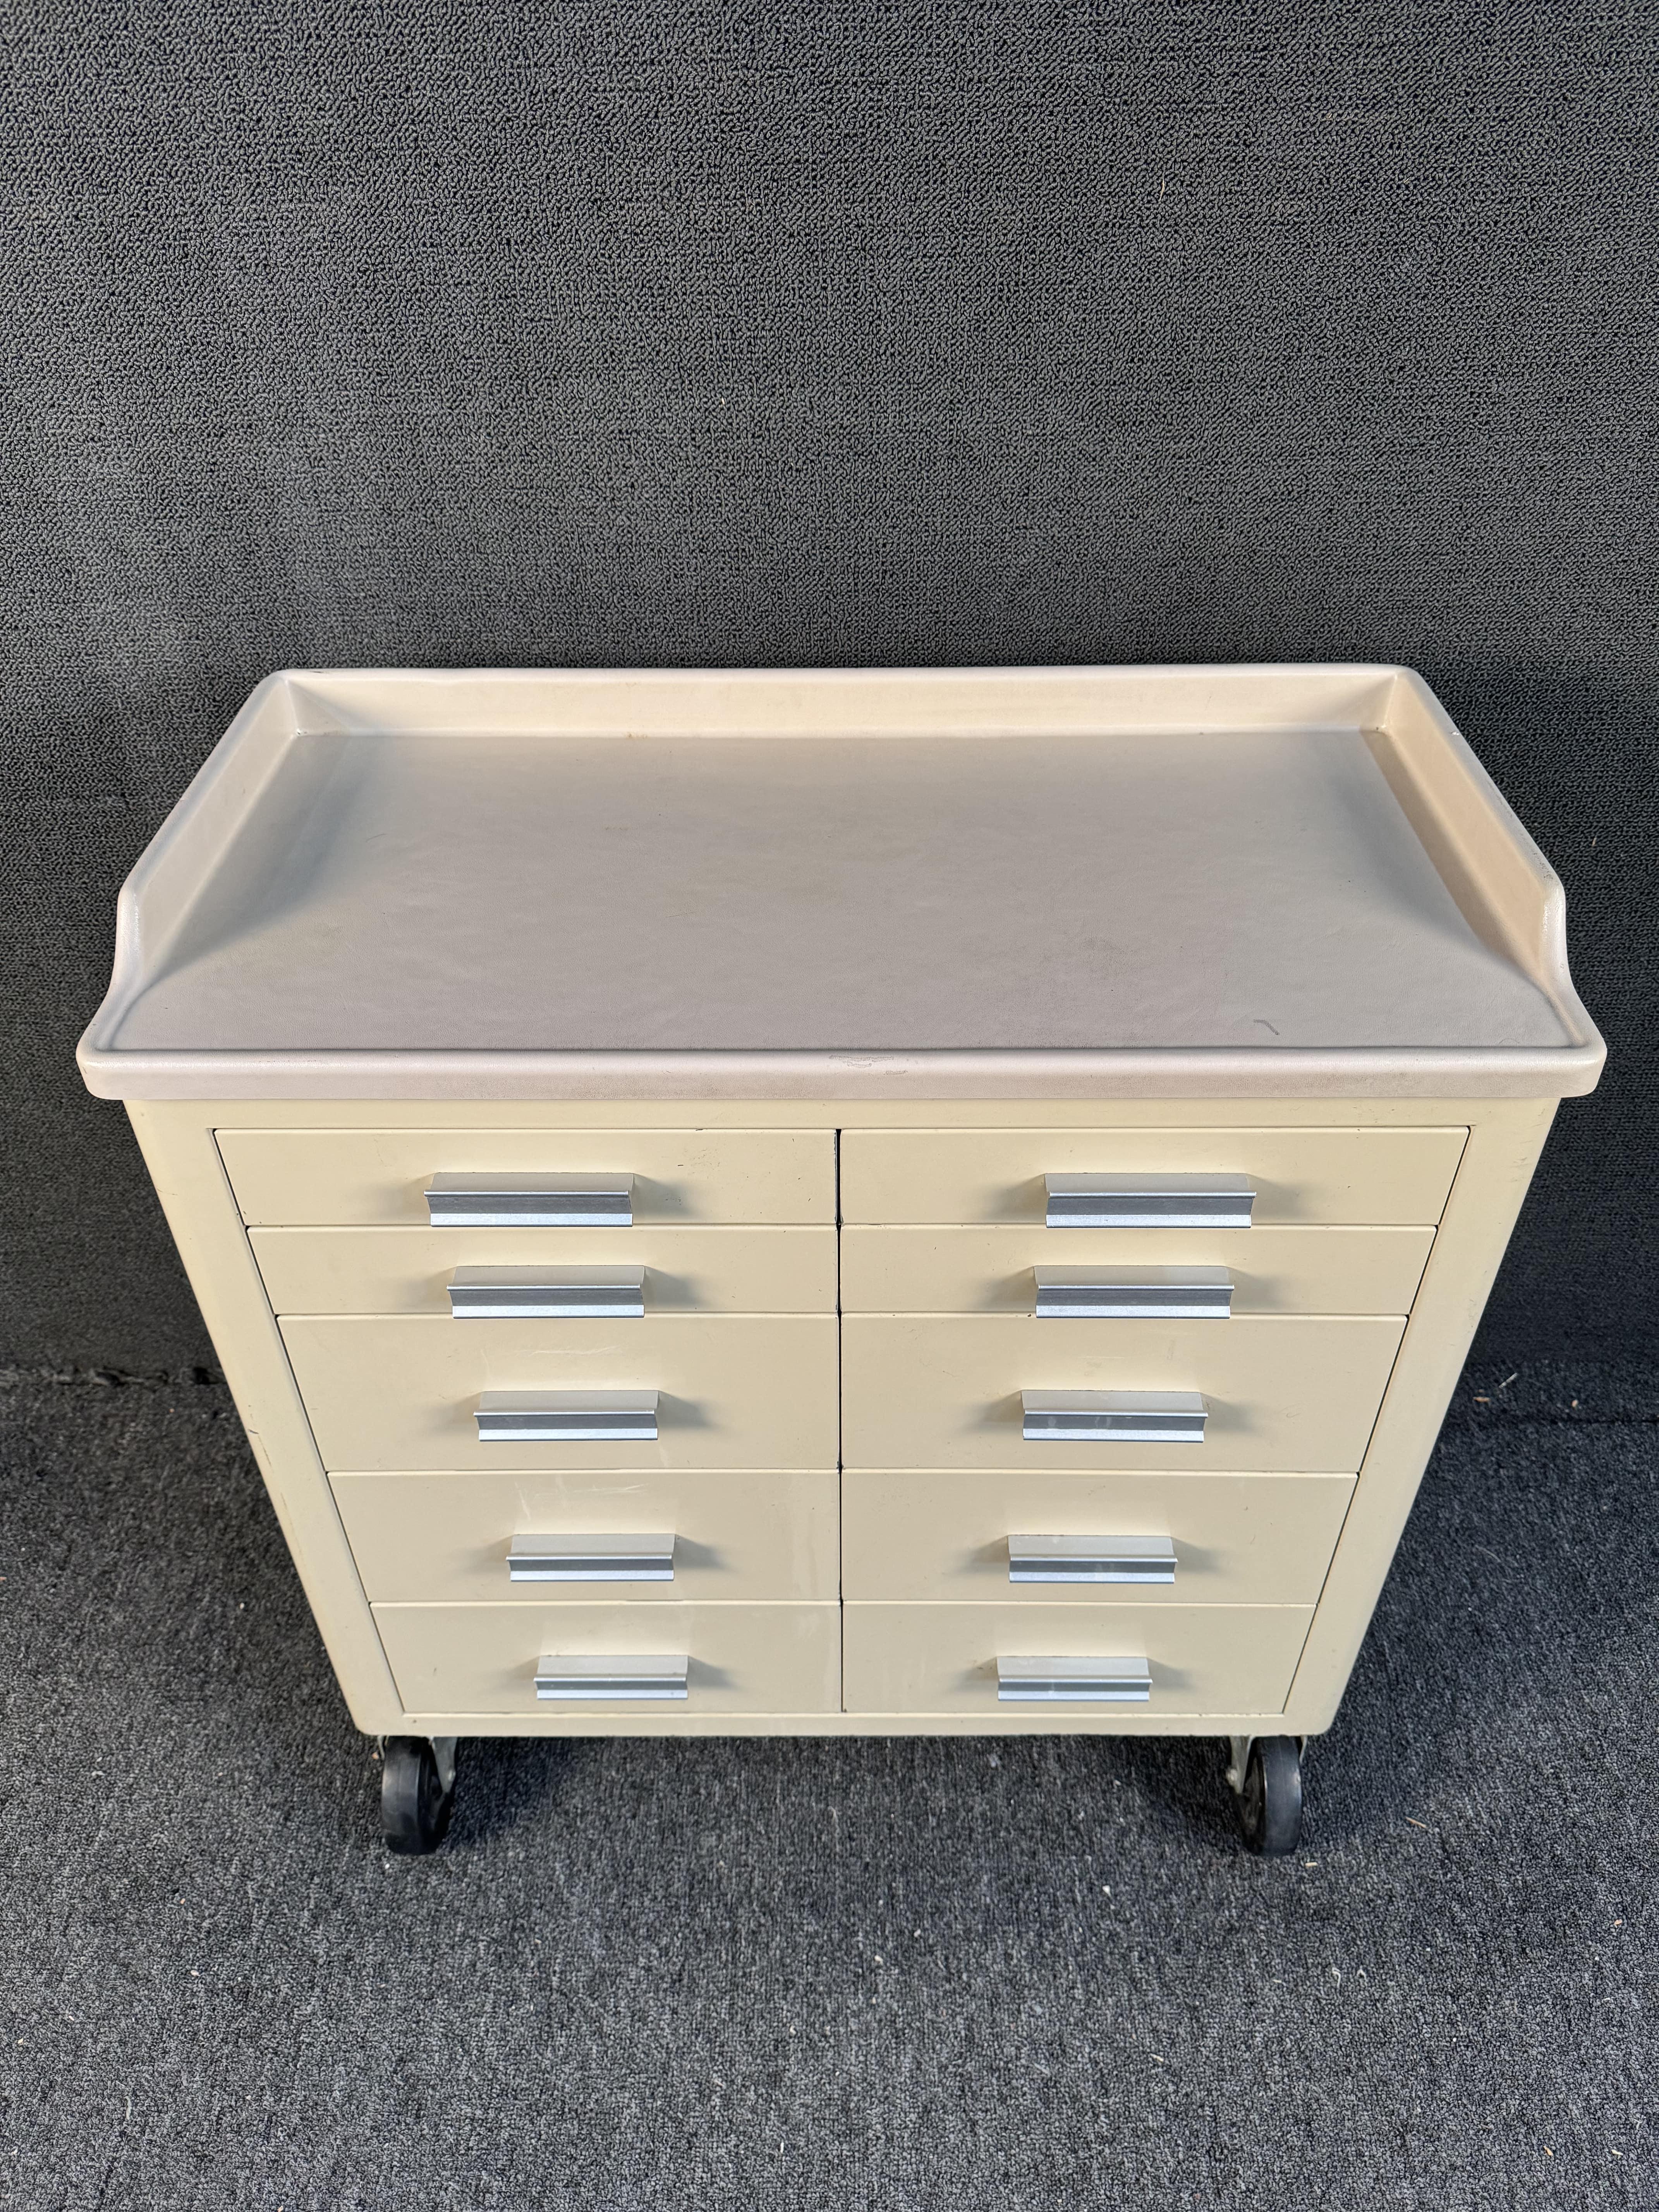 Vintage rolling medical cabinet by United Metal Fabricators. Featuring sleek steel construction, 10 drawers, molded plastic top, and oversized casters. Please confirm location with dealer (NY or NJ)